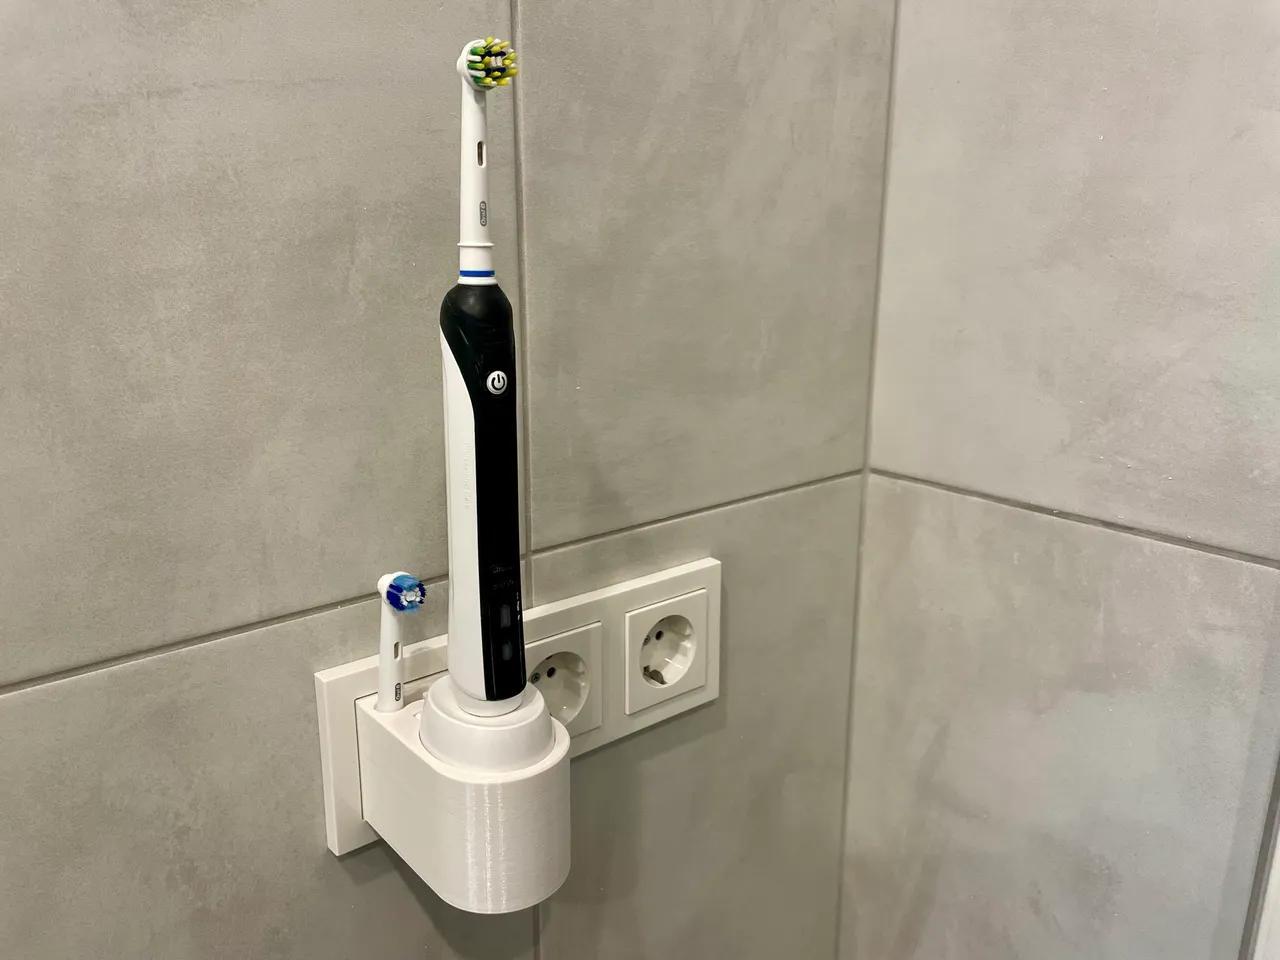 Minimalist Oral-B Braun Electric Toothbrush Wall Mount by András Bognár, Download free STL model